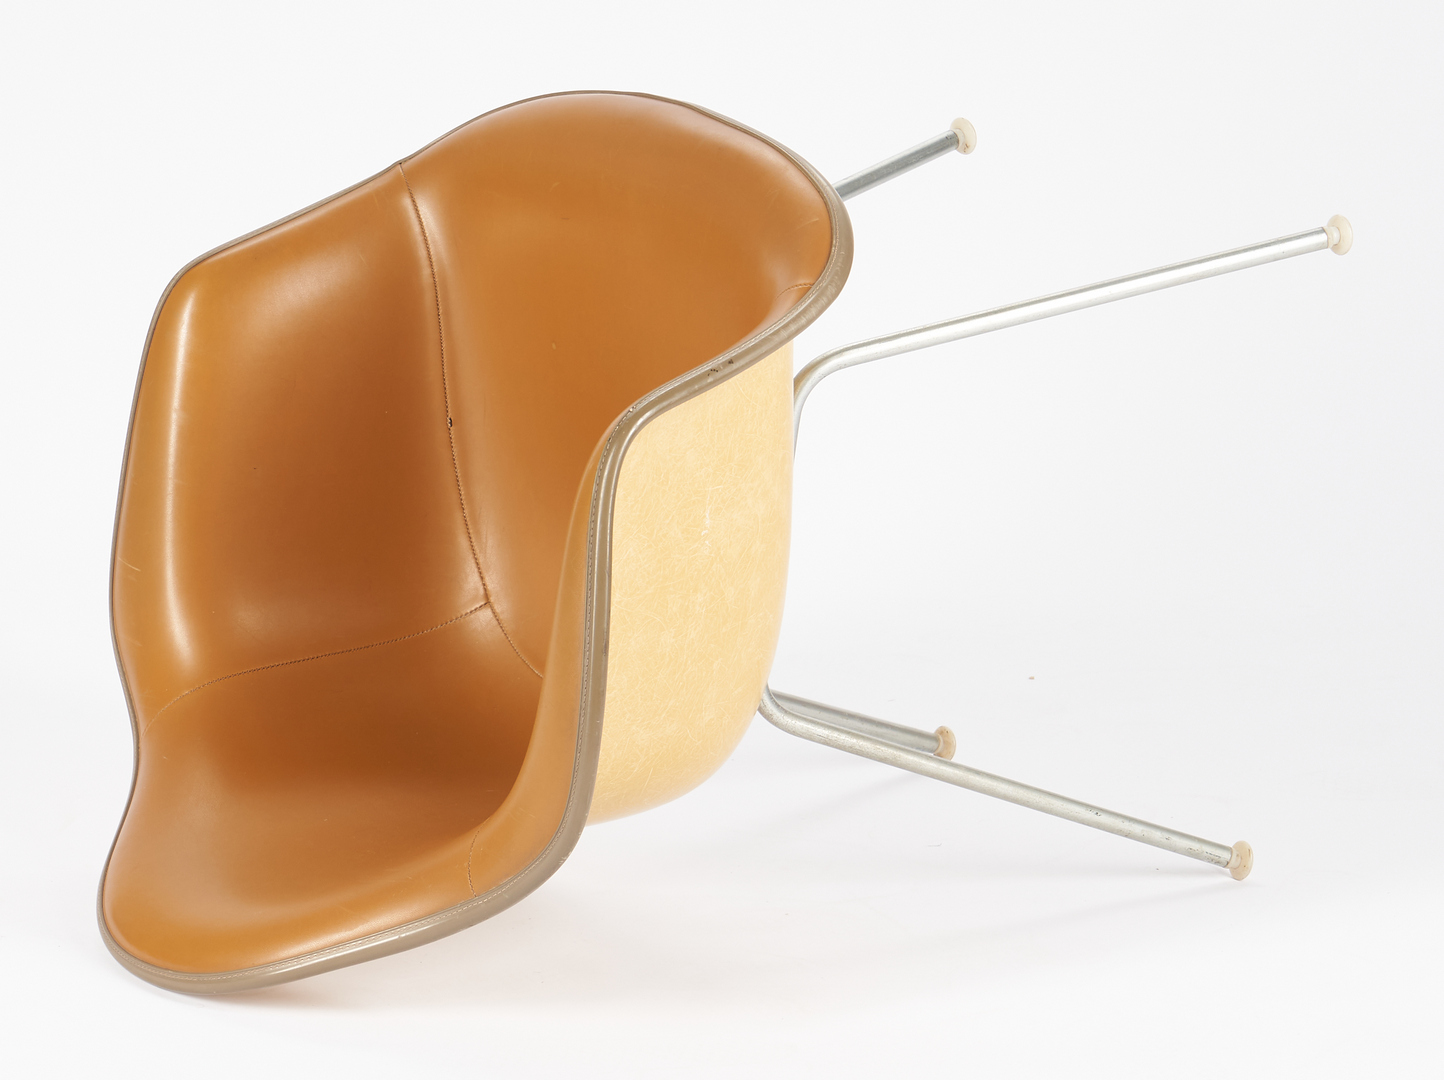 Lot 863: 3 Eames for Herman Miller Shell Chairs